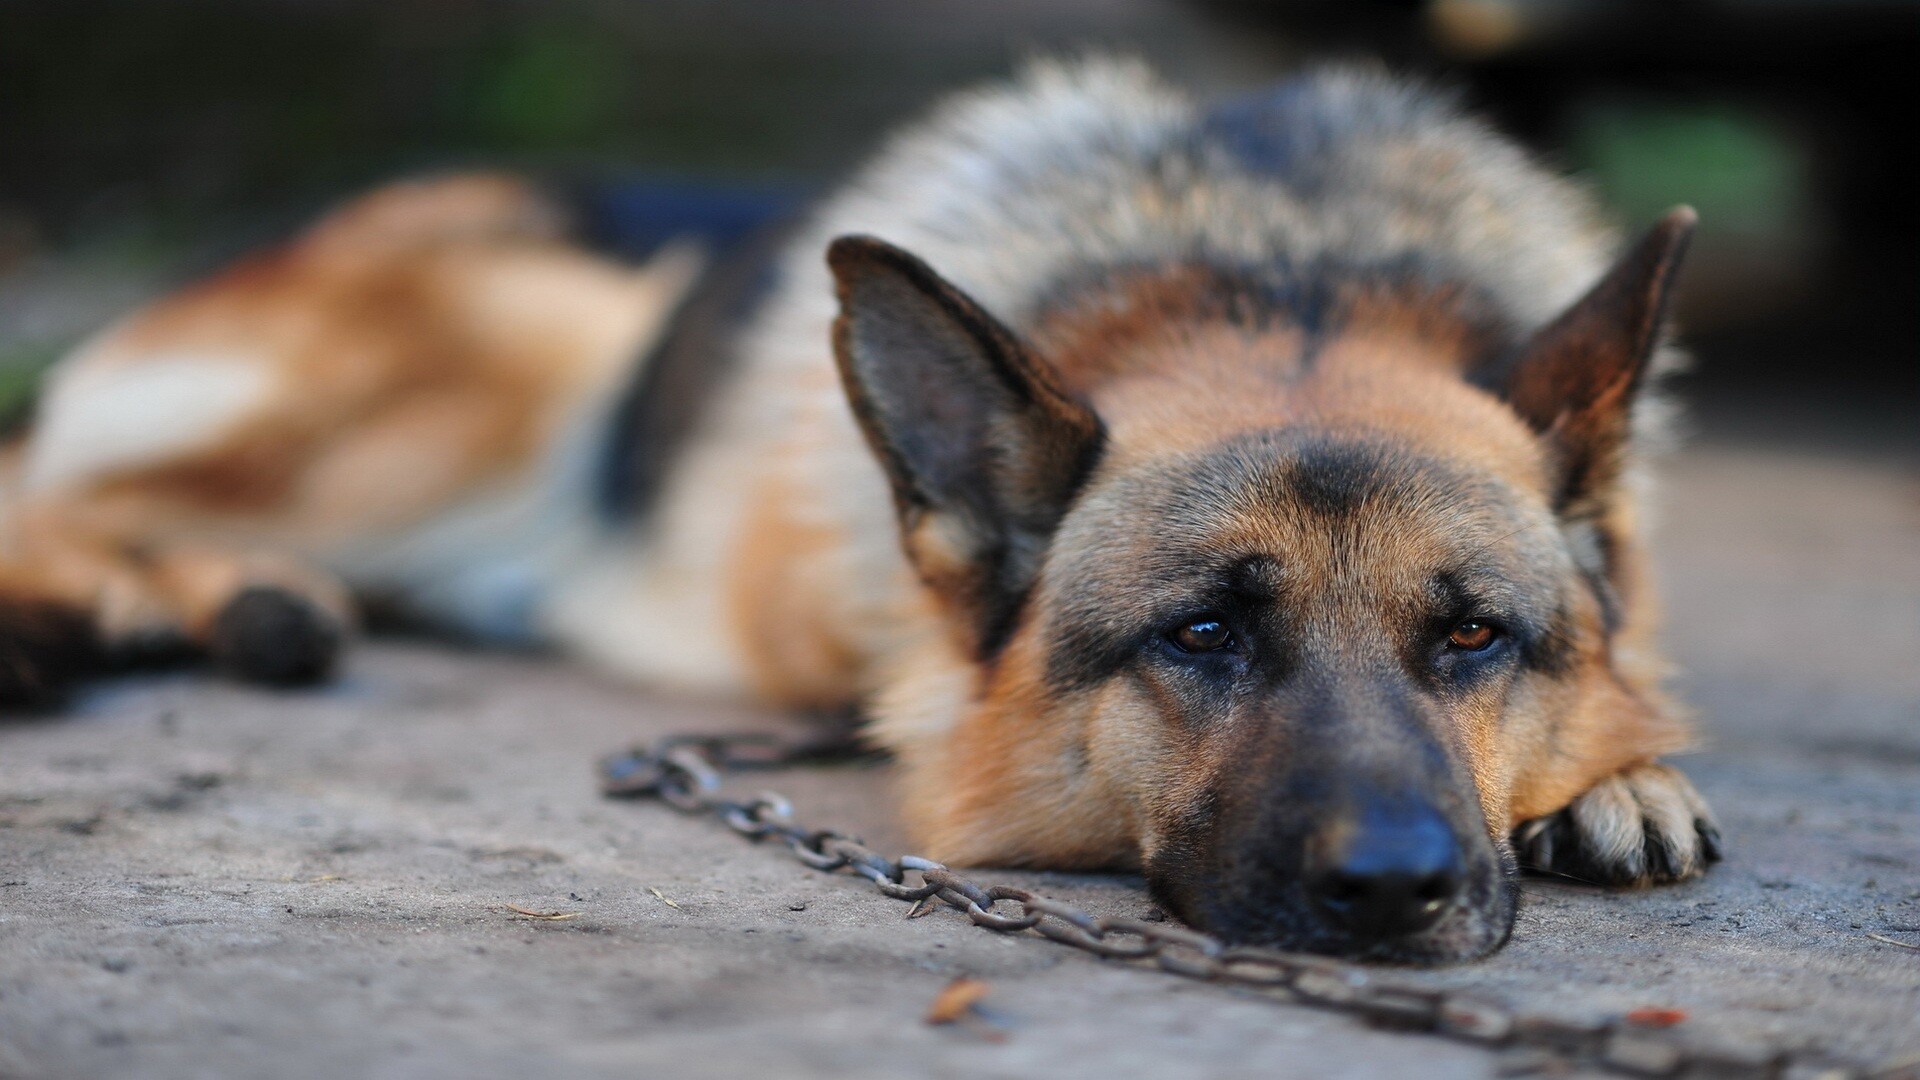 German Shepherd: Ranks at the top of the most popular dog breeds in America. 1920x1080 Full HD Wallpaper.